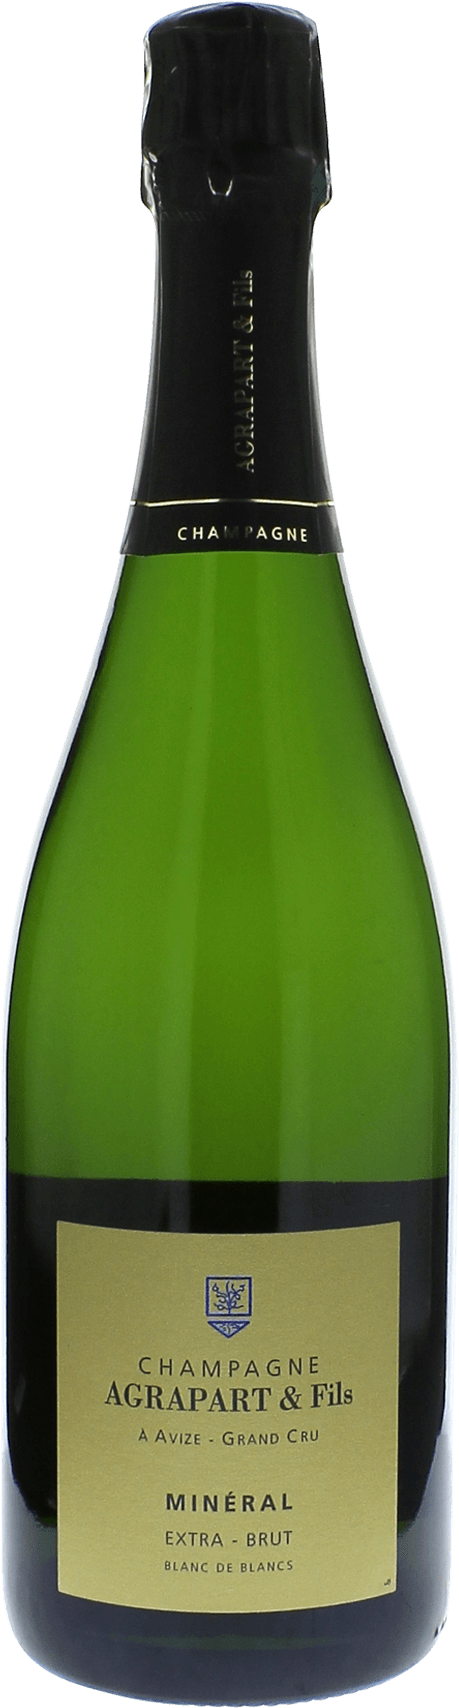 Agrapart  mineral extra brut blanc de blancs 2007  Champagne, Agrapart